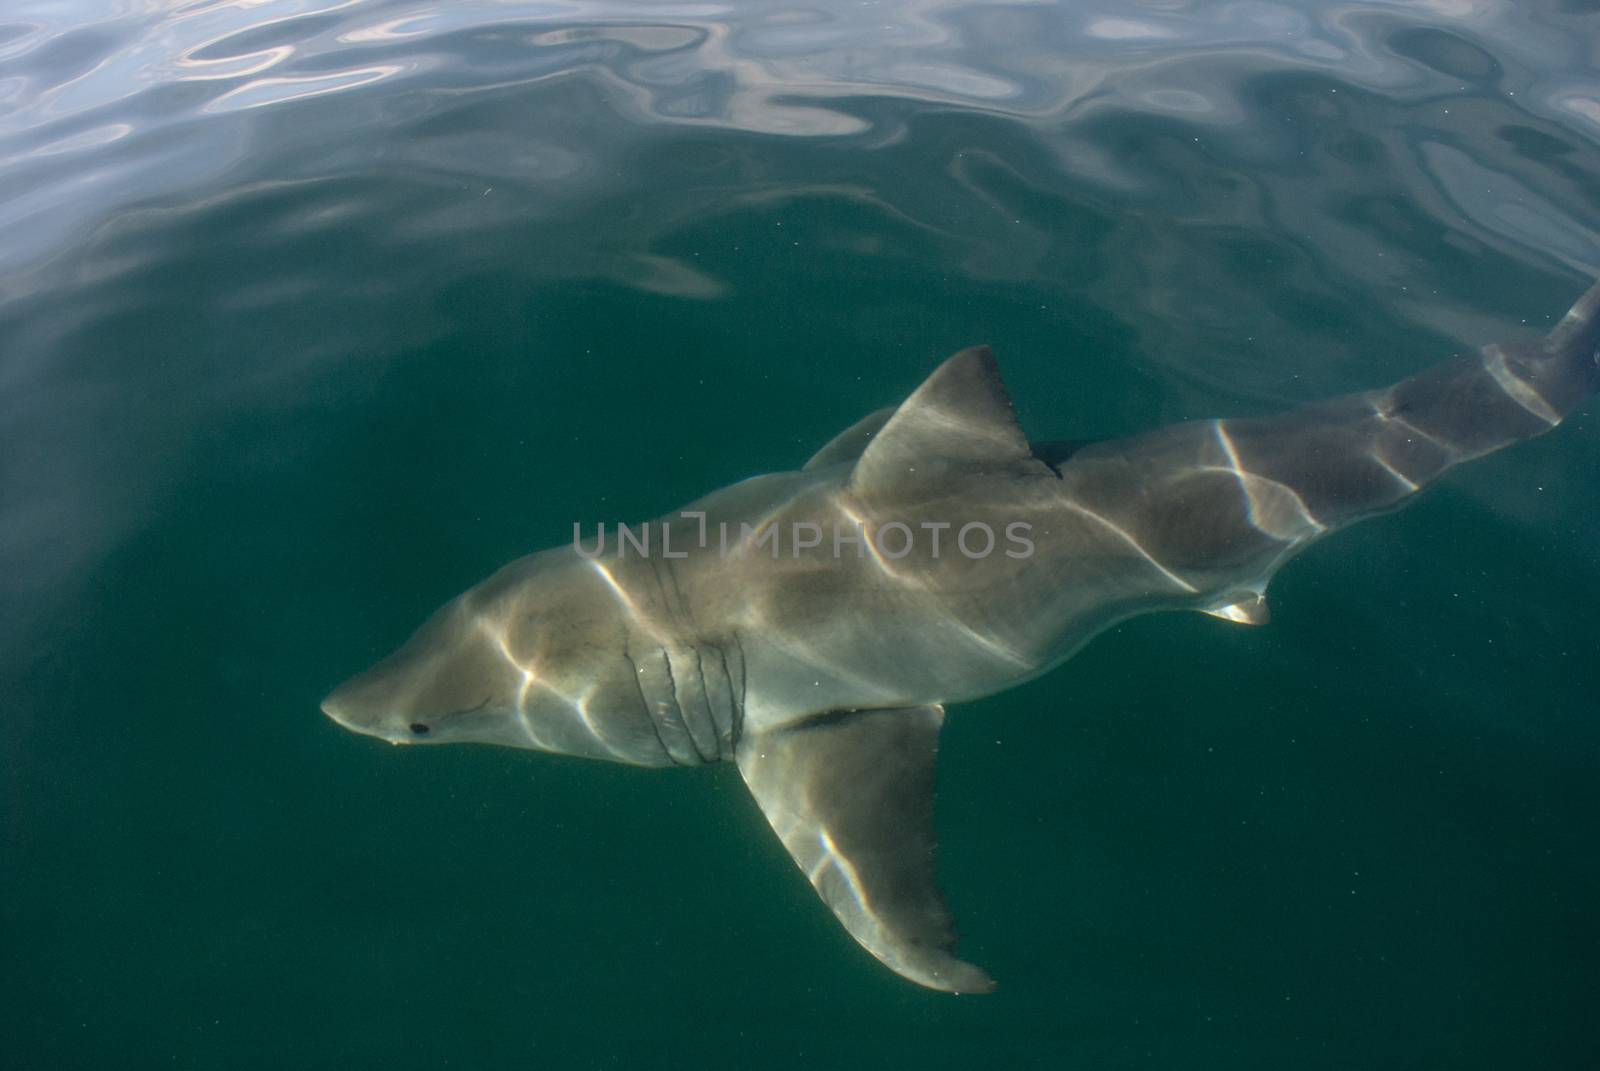 Great white shark (Carcharodon carcharias) by Anna07